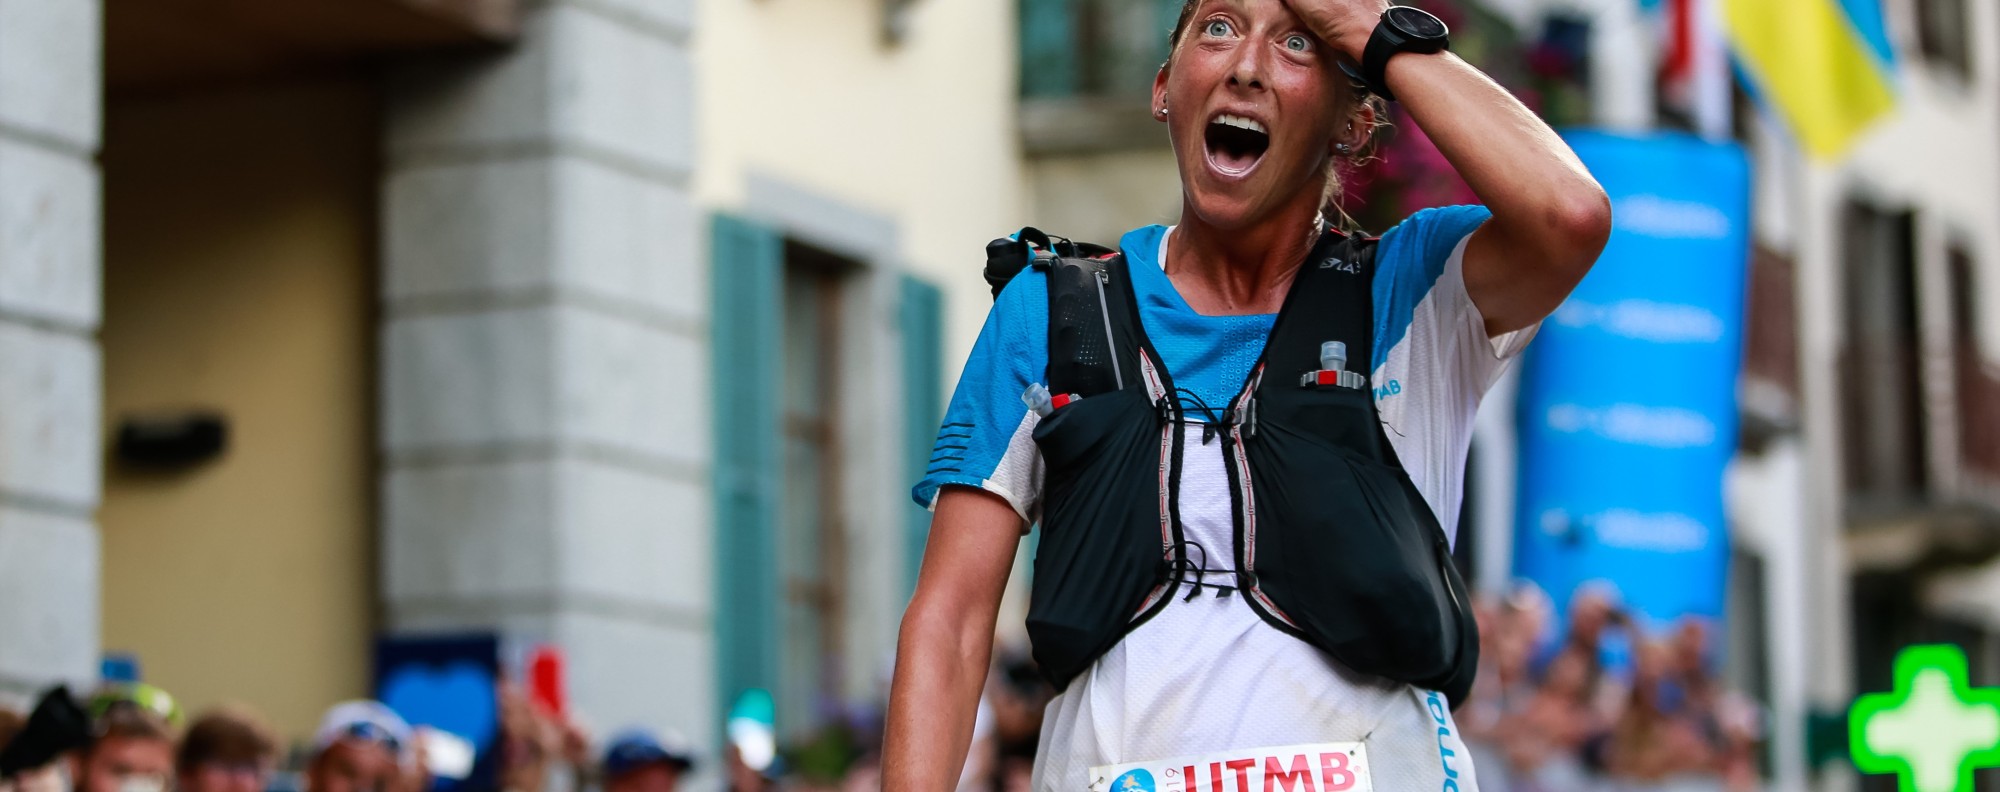 Courtney Dauwalter’s UTMB win elevates her from one of the greats to